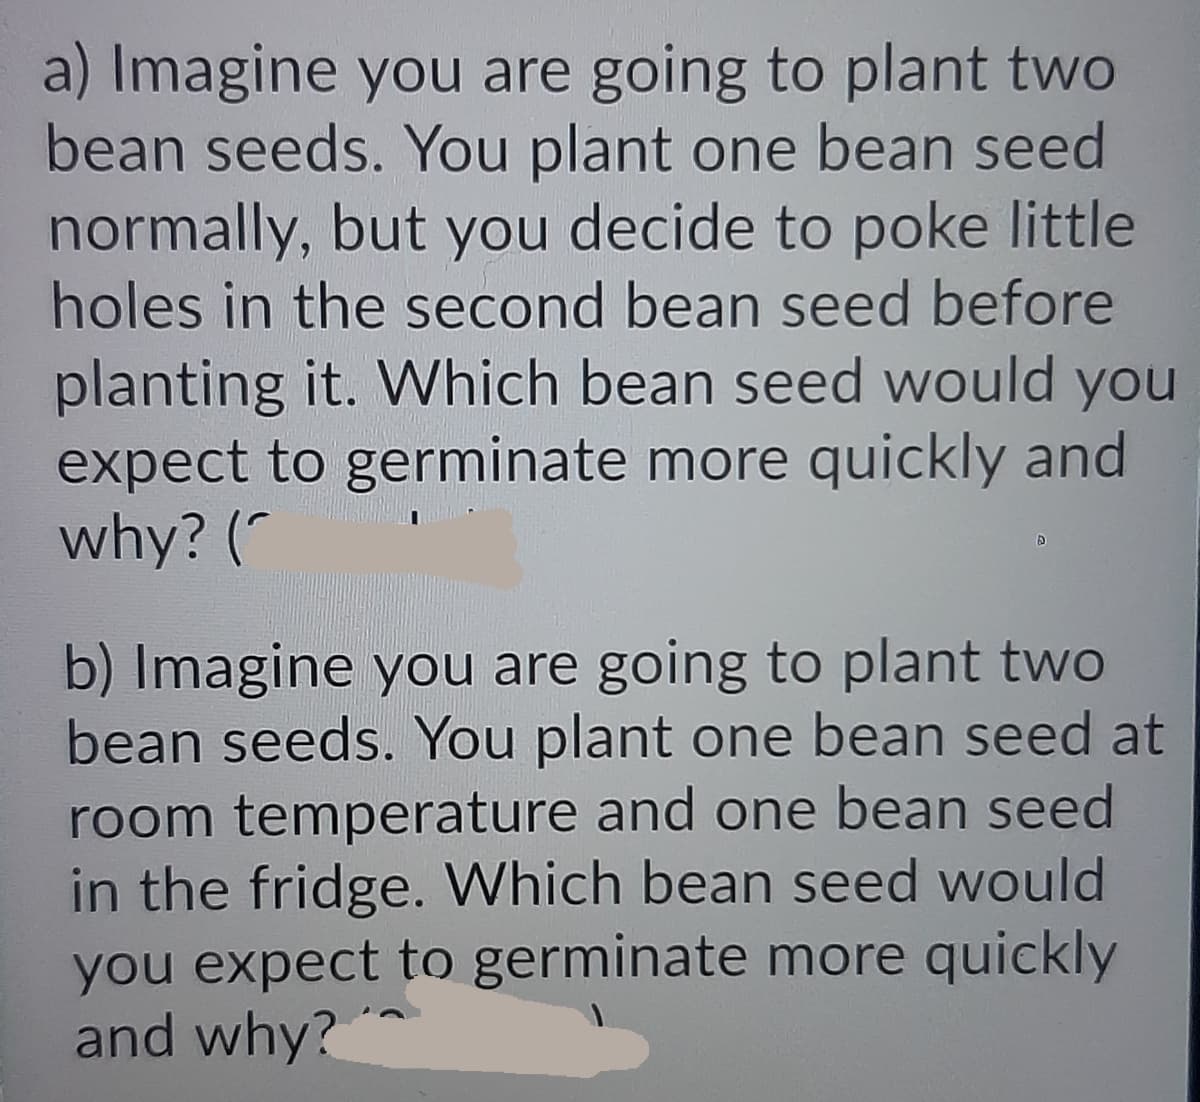 a) Imagine you are going to plant two
bean seeds. You plant one bean seed
normally, but you decide to poke little
holes in the second bean seed before
planting it. Which bean seed would you
expect to germinate more quickly and
why? (*
b) Imagine you are going to plant two
bean seeds. You plant one bean seed at
room temperature and one bean seed
in the fridge. Which bean seed would
you expect to germinate more quickly
and why?*
